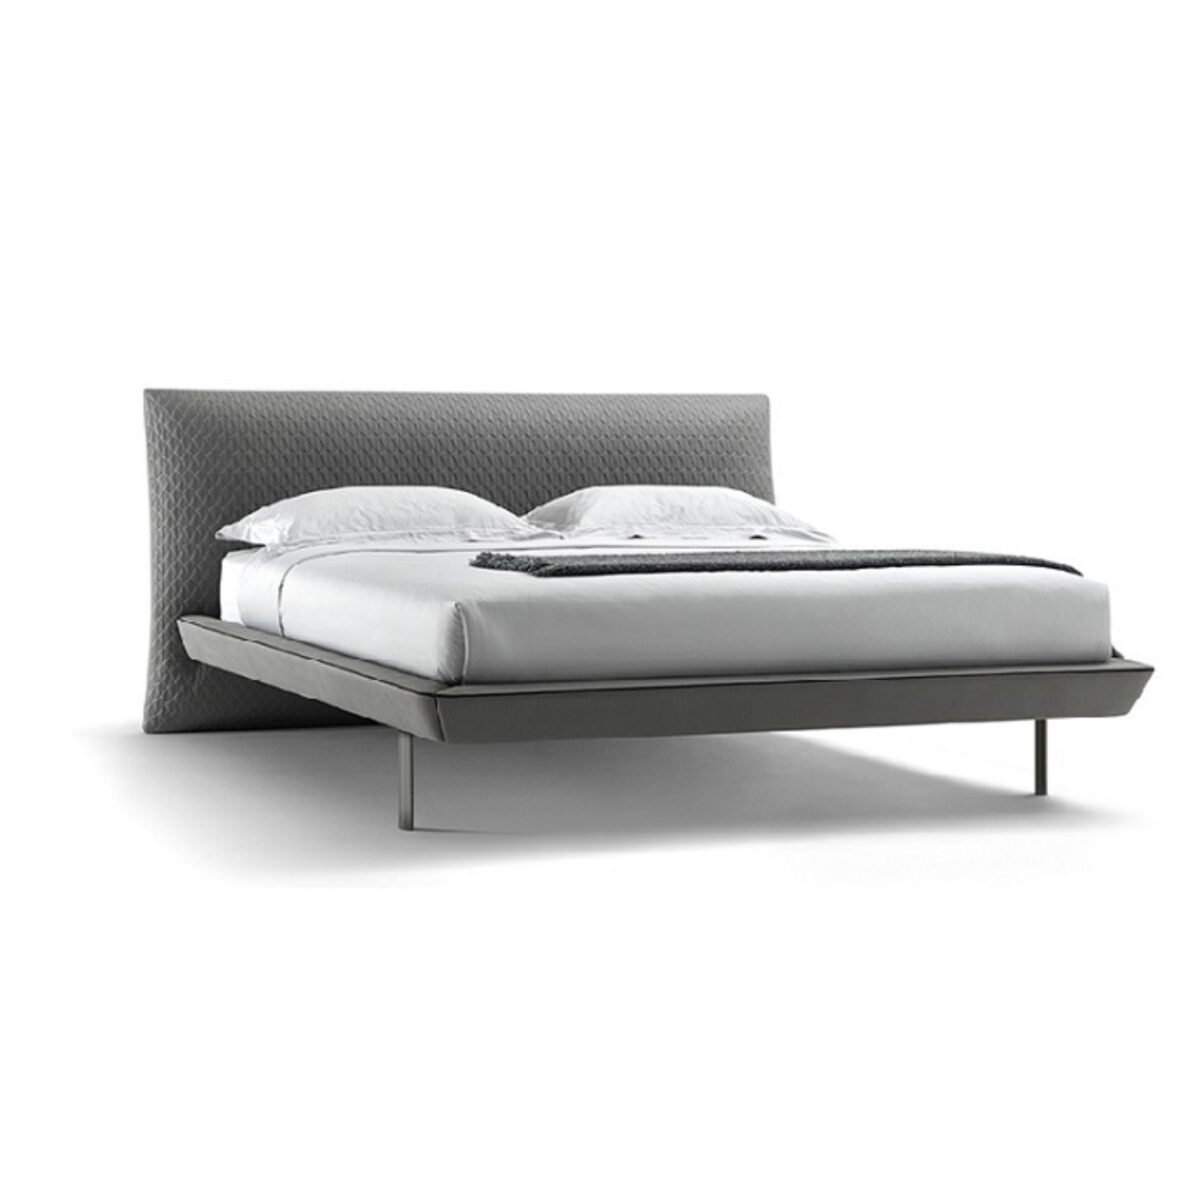 Ceppi the Italian touch Sirio bed